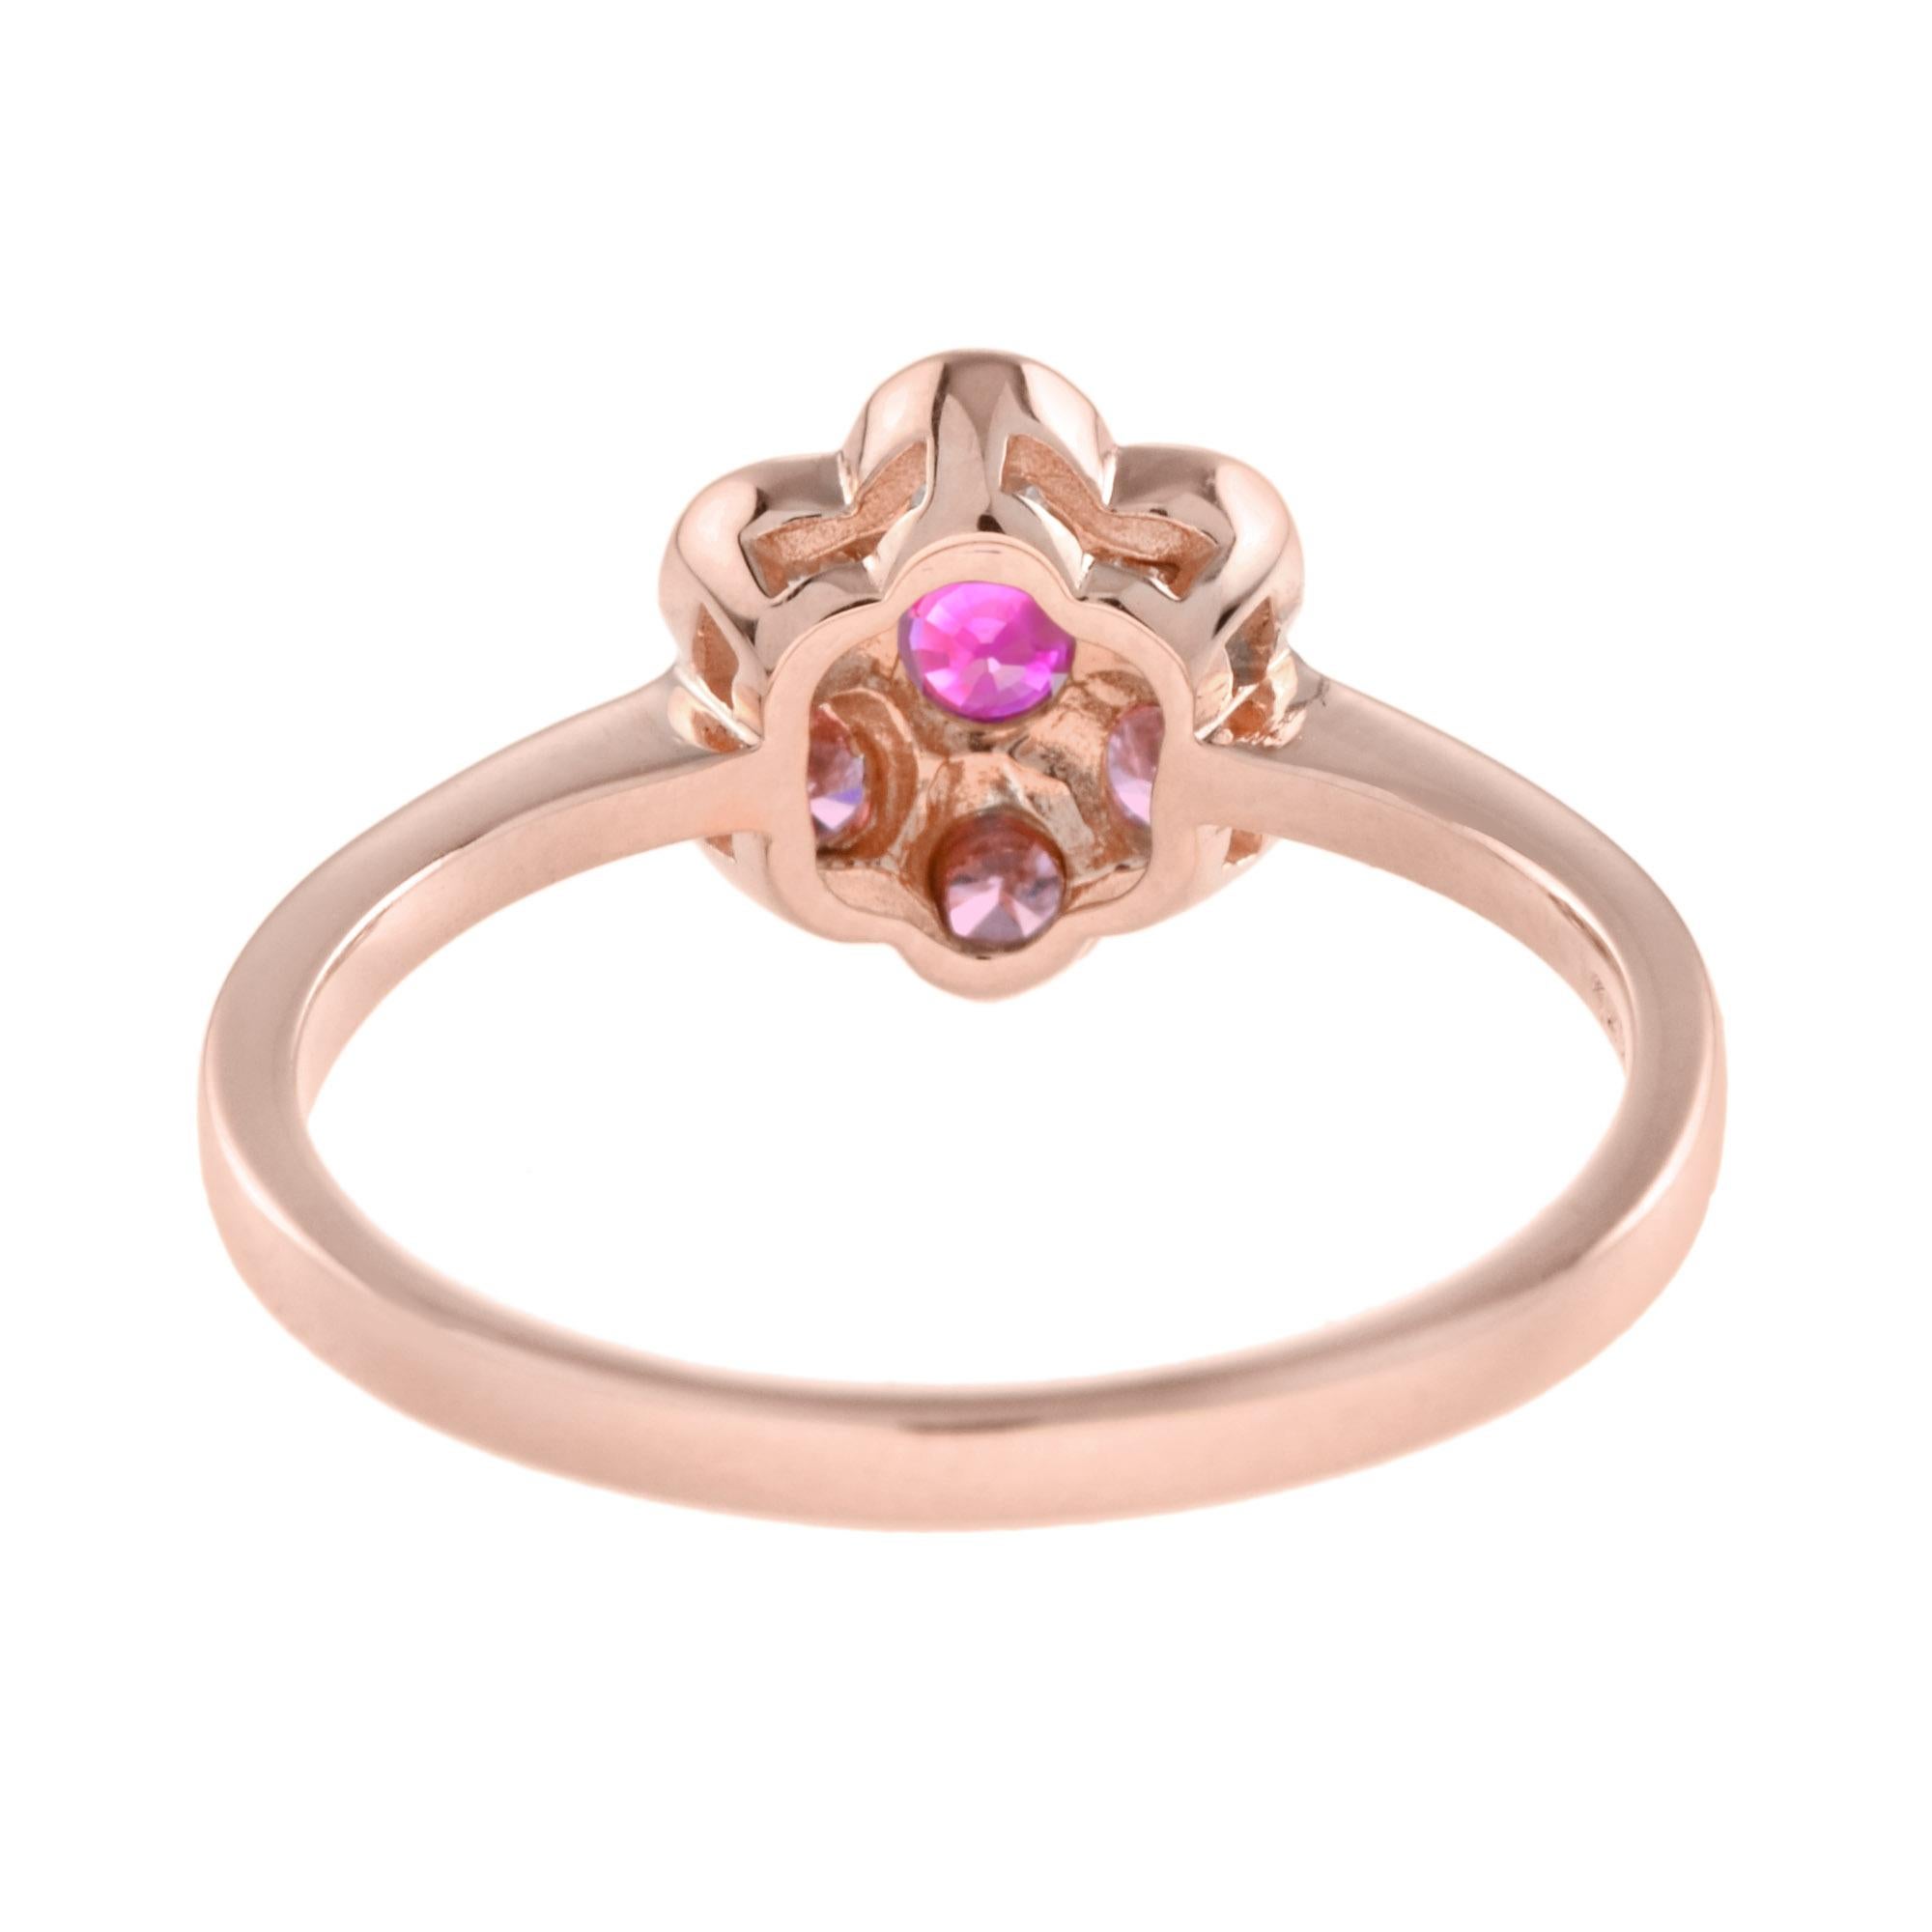 For Sale:  Ruby and Pink Tourmaline Floral Cluster Ring in 14K Rose Gold 6